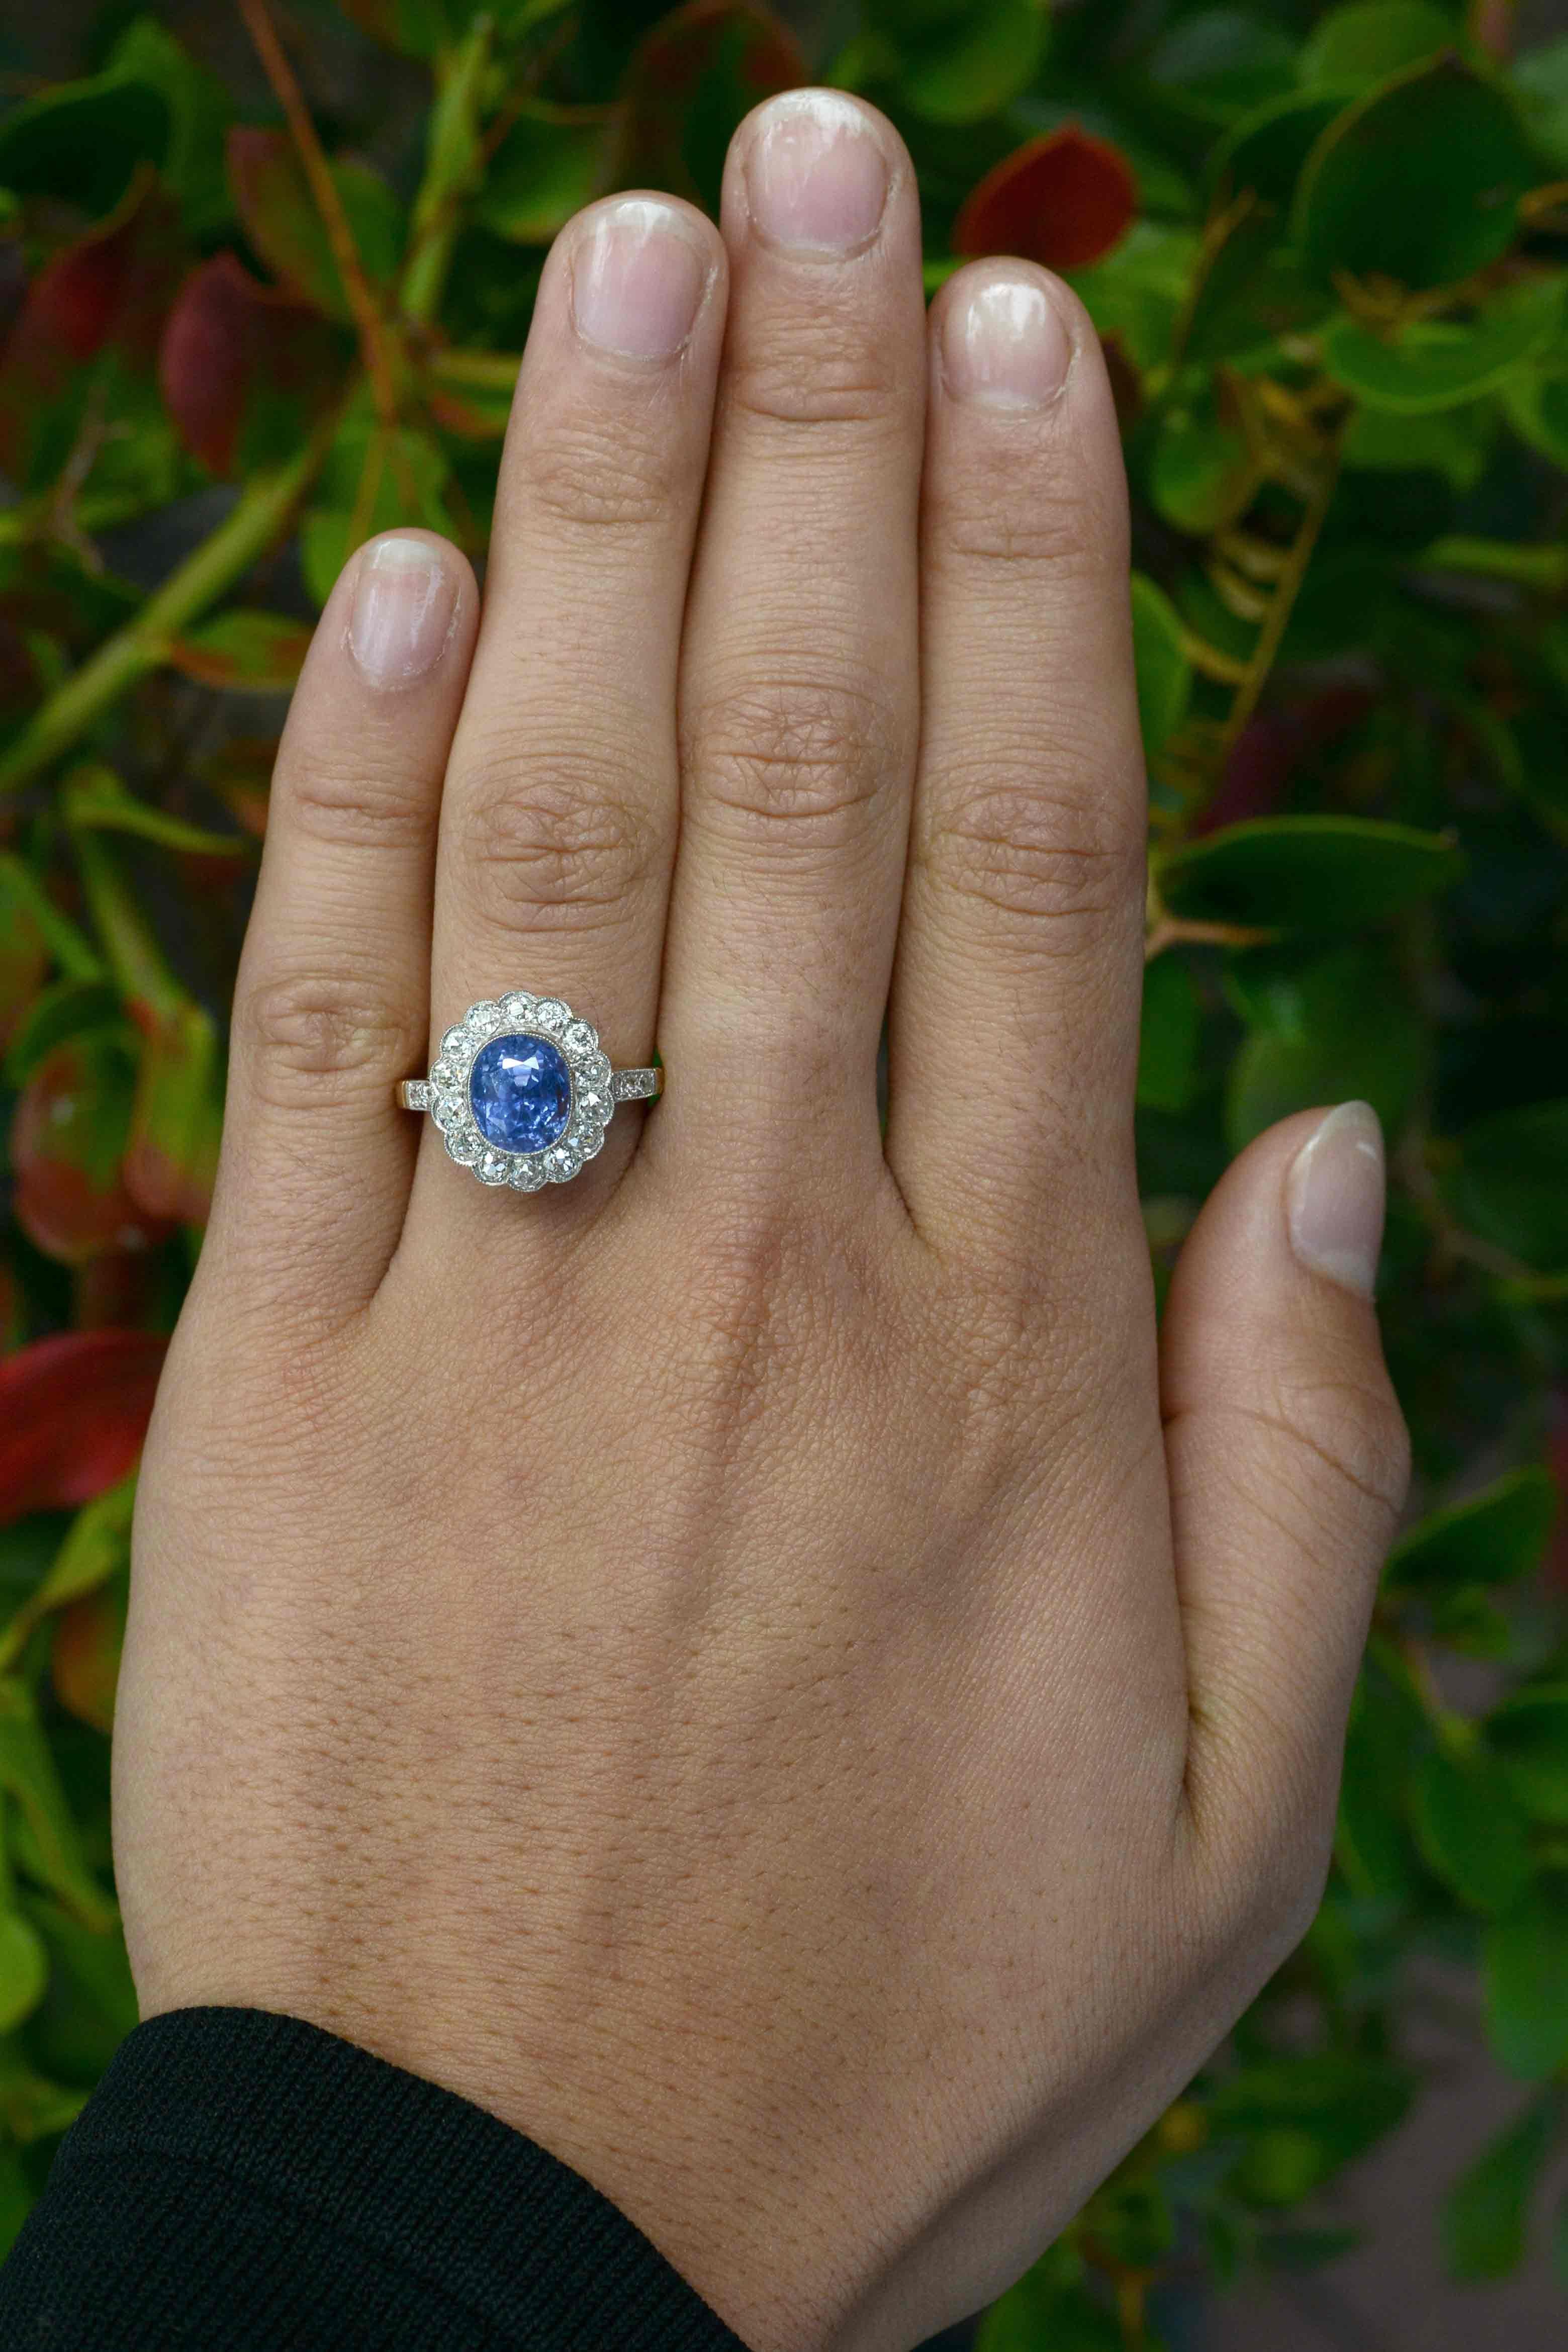 Centering on an unusual, 4.30 Ct natural unheated sapphire of a most captivating violet blue, this original Edwardian antique sapphire engagement ring is an authentic heirloom, over 100 years old. The floral design cocktail ring adorned with 1 carat